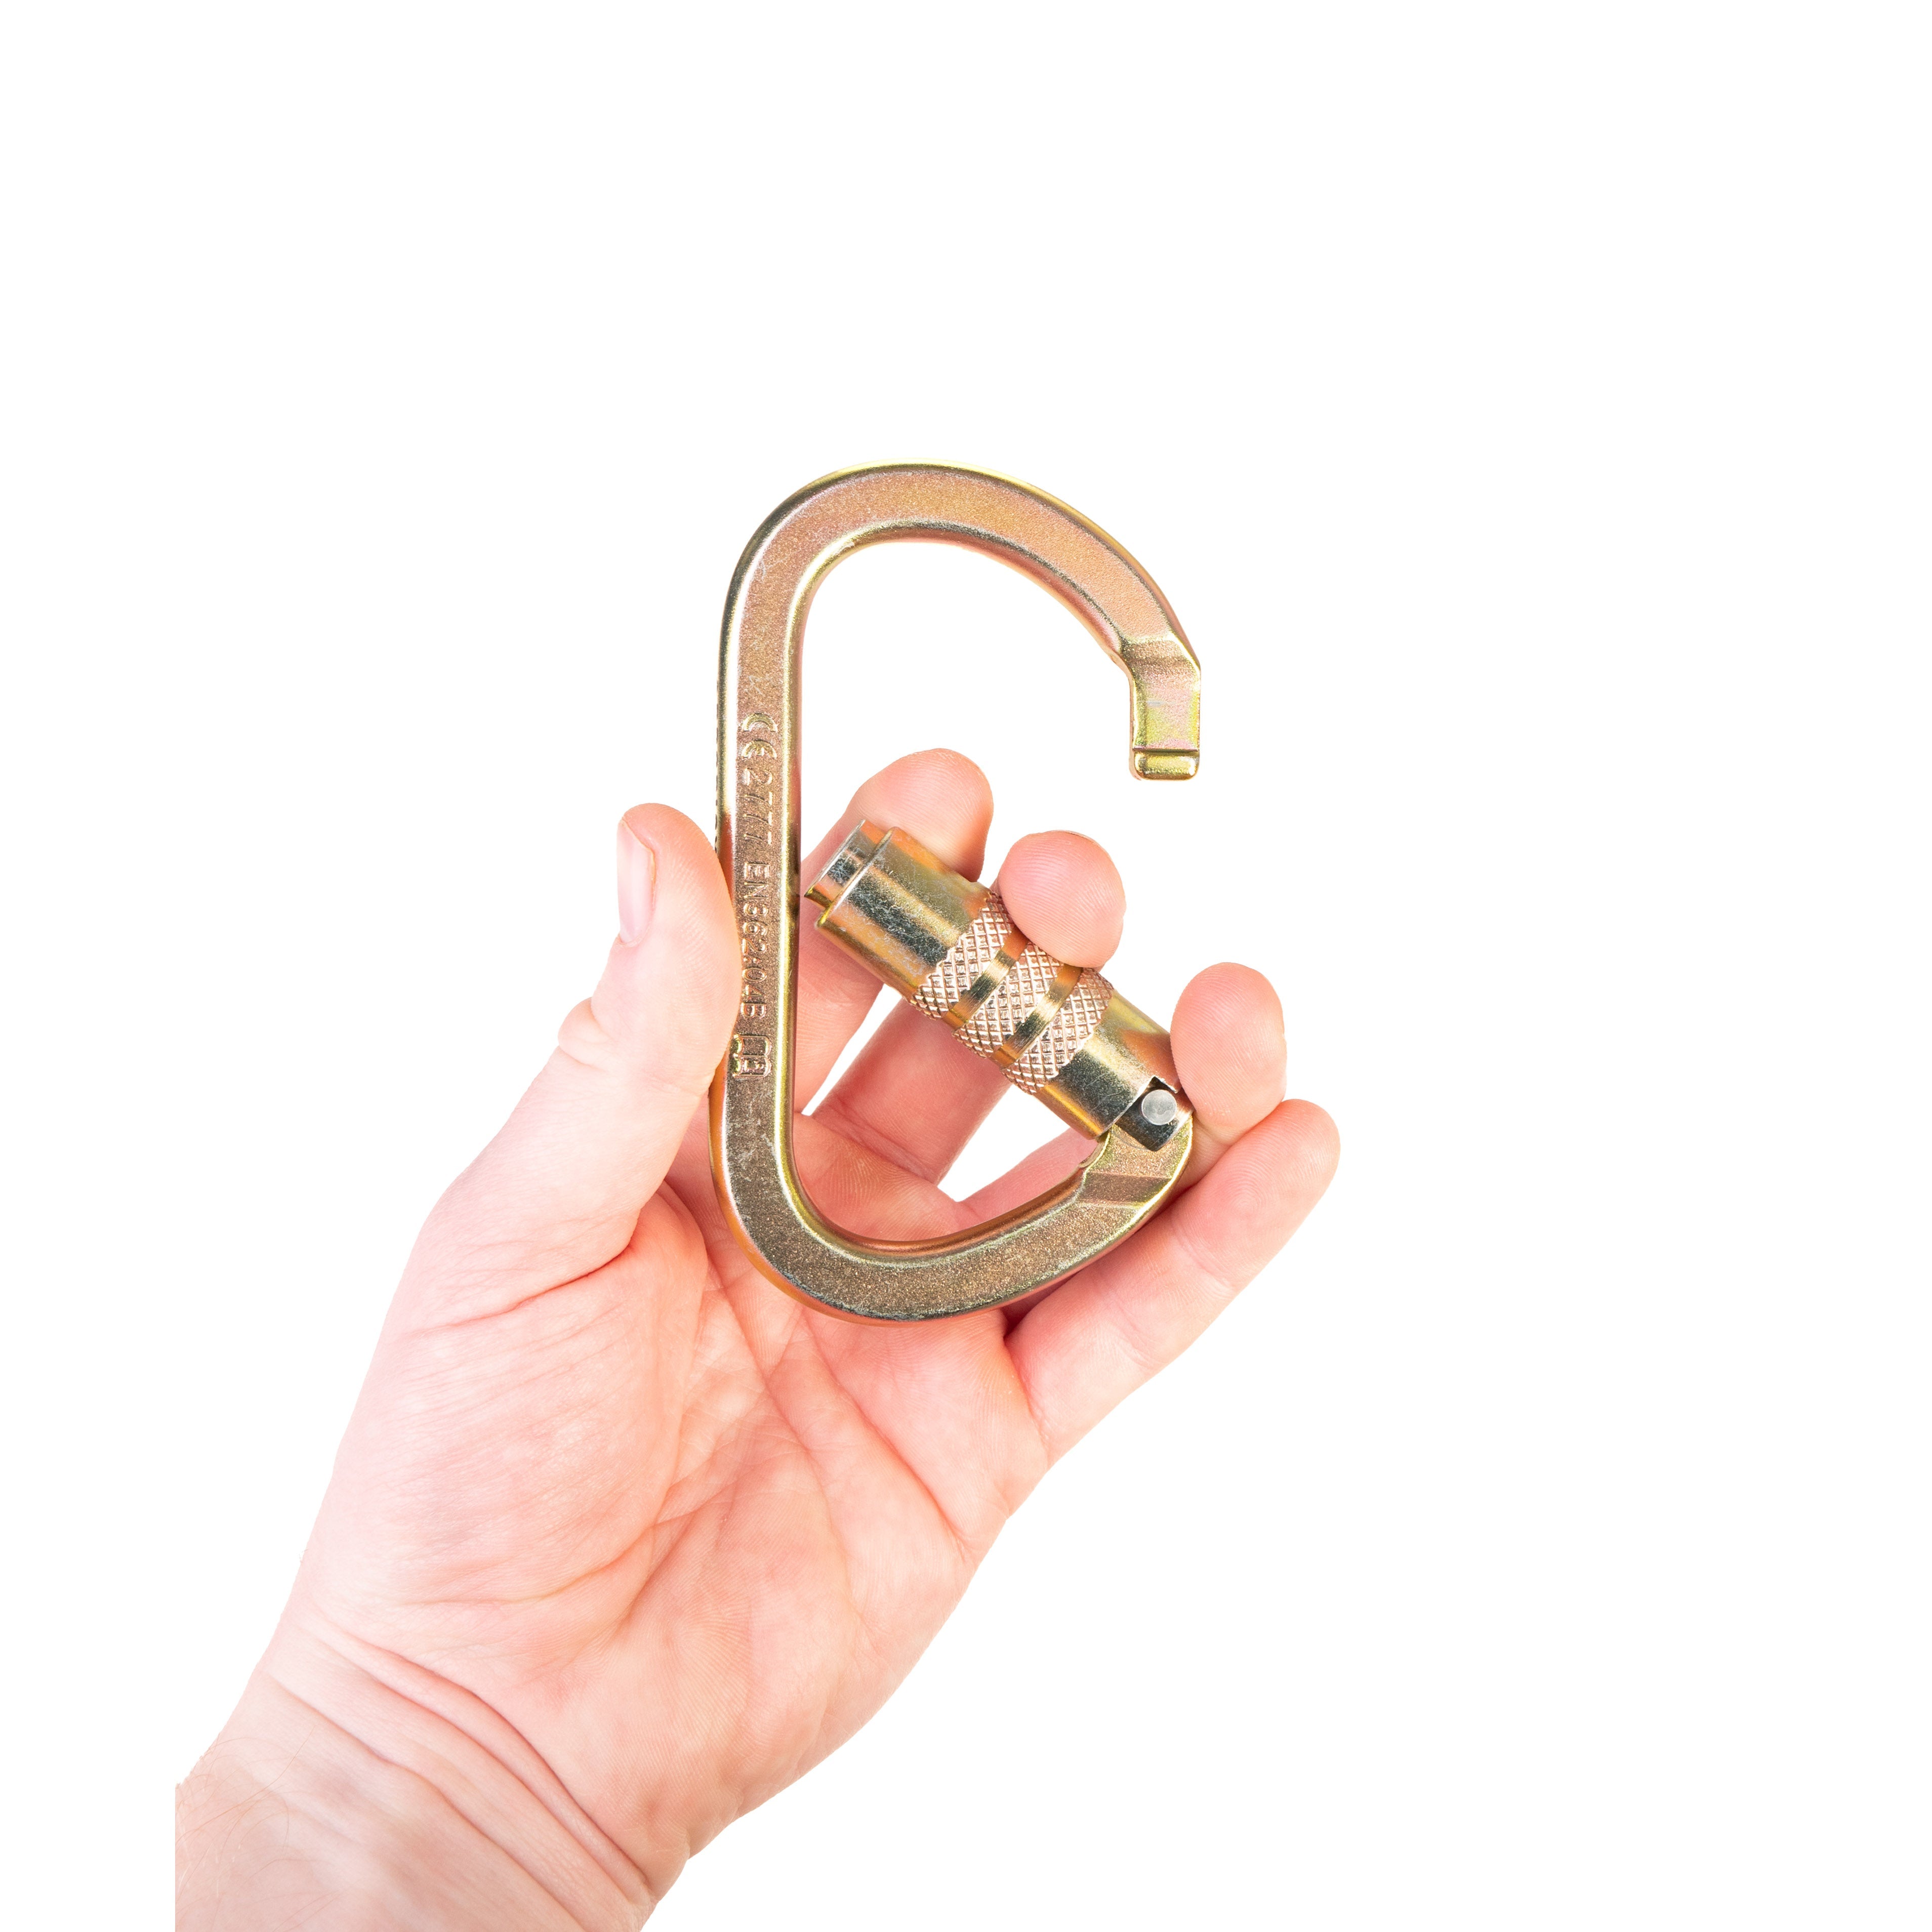 offset oval carabiner open in hand